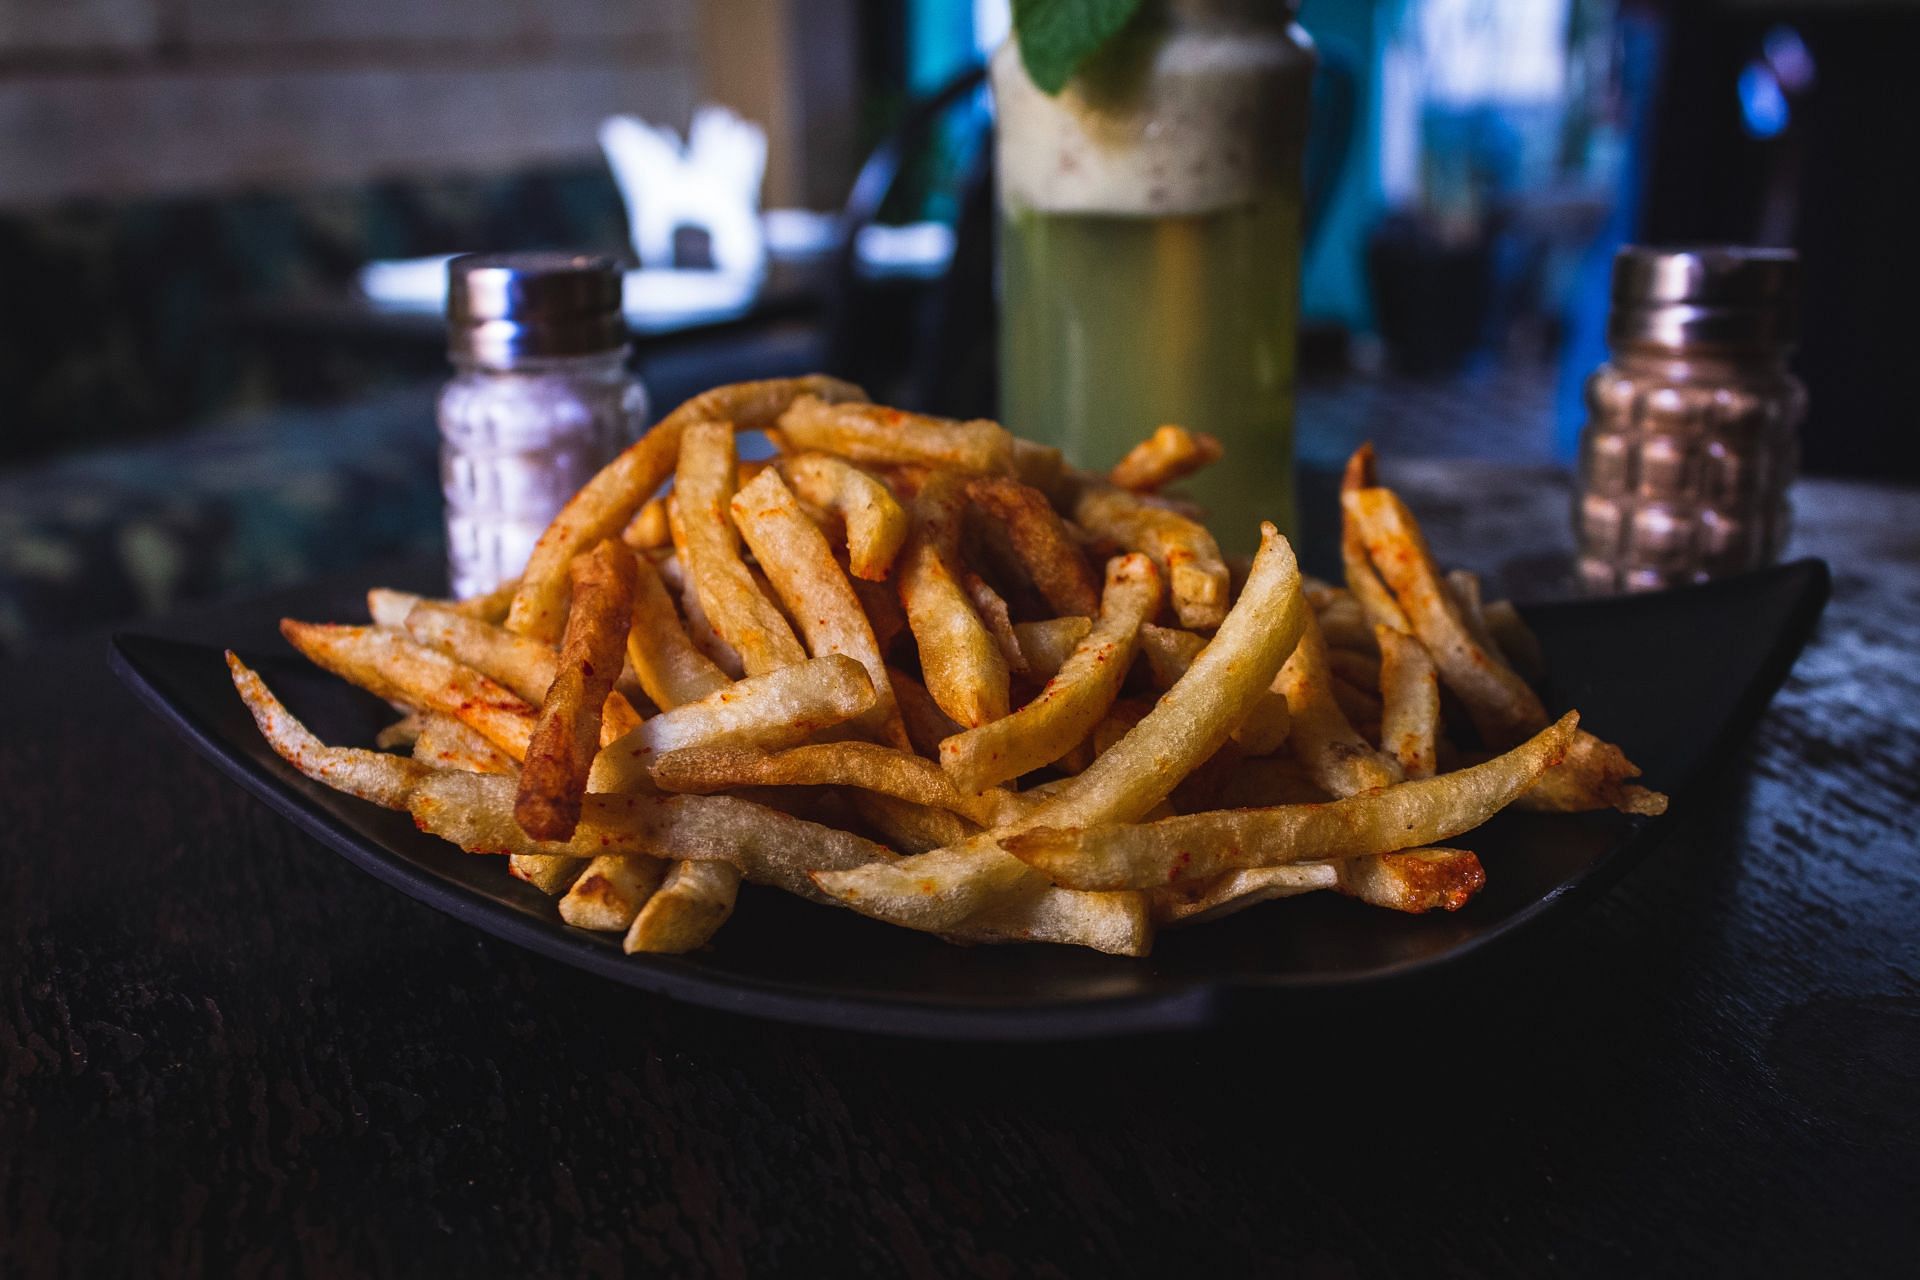 Fried foods contain unsaturated fats. (Image via Unsplash/Louis Hansel)